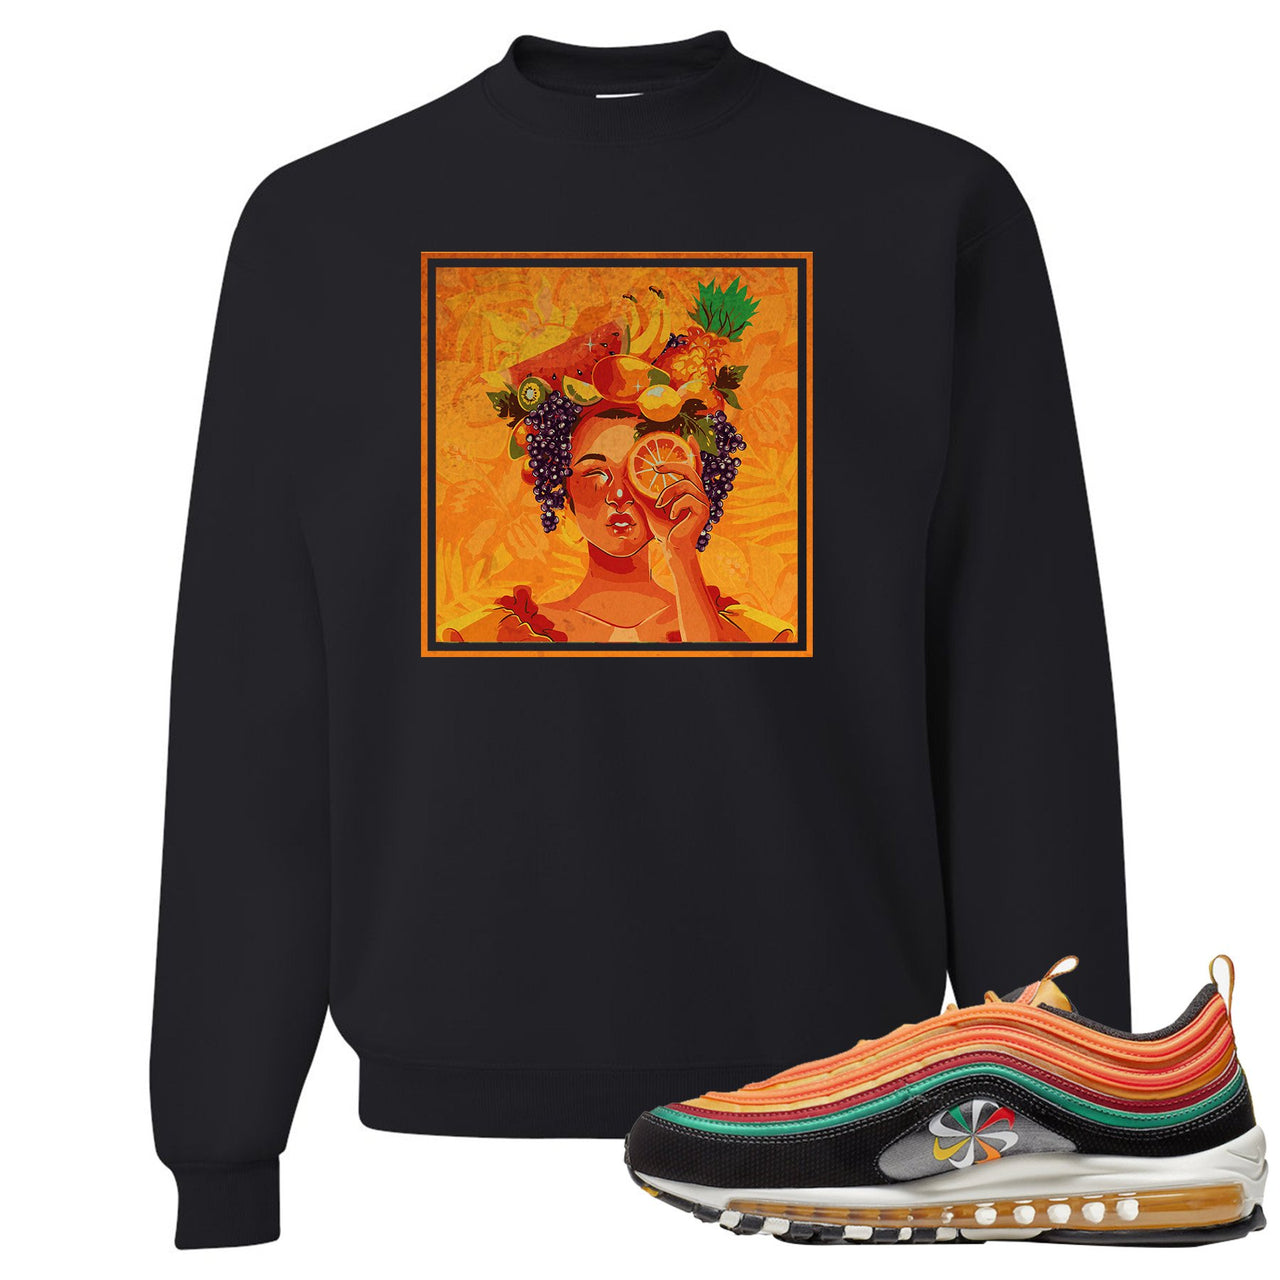 Printed on the front of the Air Max 97 Sunburst black sneaker matching crewneck sweatshirt is the Lady Fruit logo